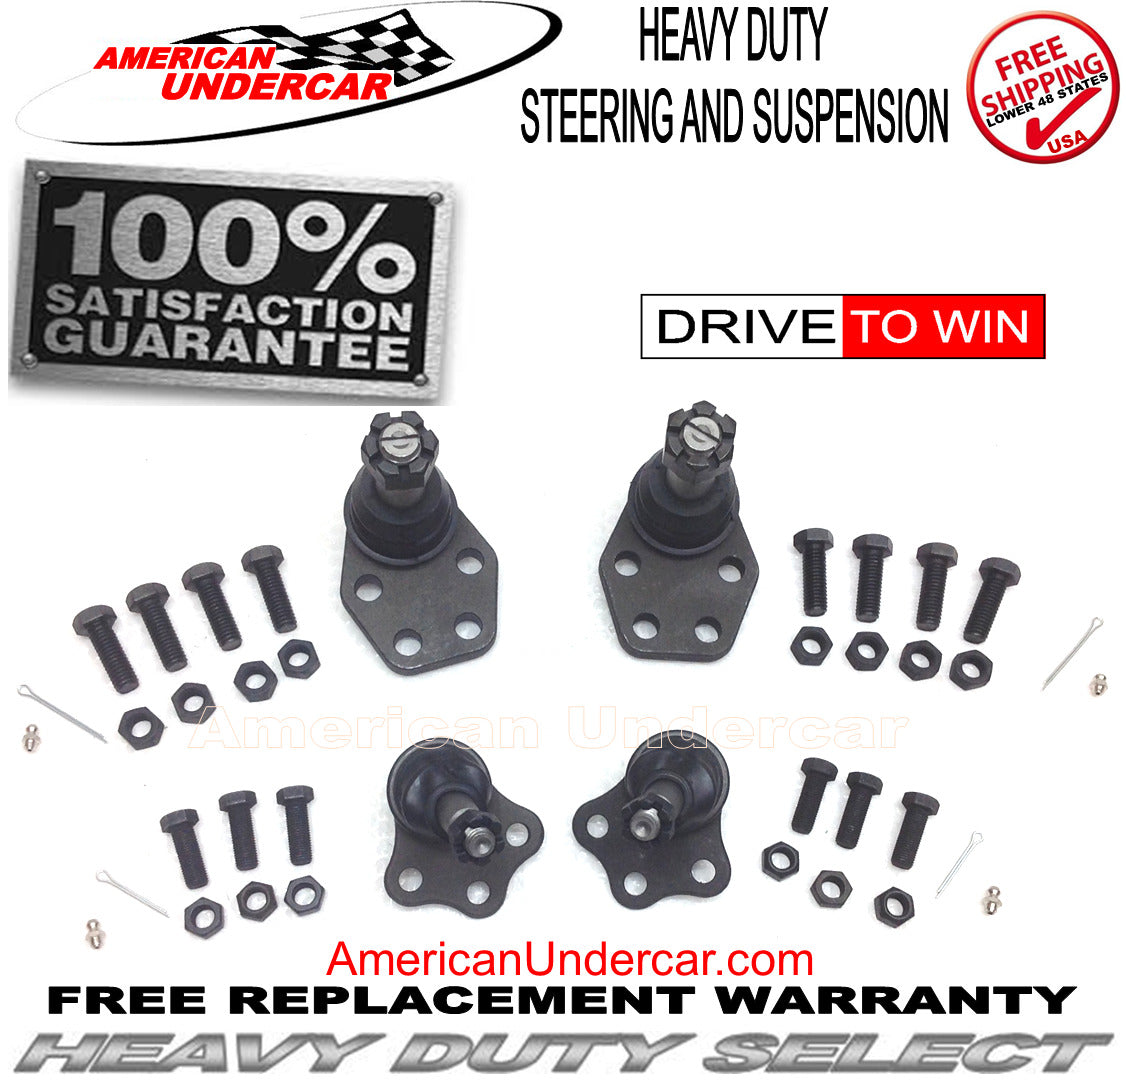 HD Ball Joint Upper & Lower Suspension Kit for 2000-2002 Dodge Ram 2500, 3500 2WD